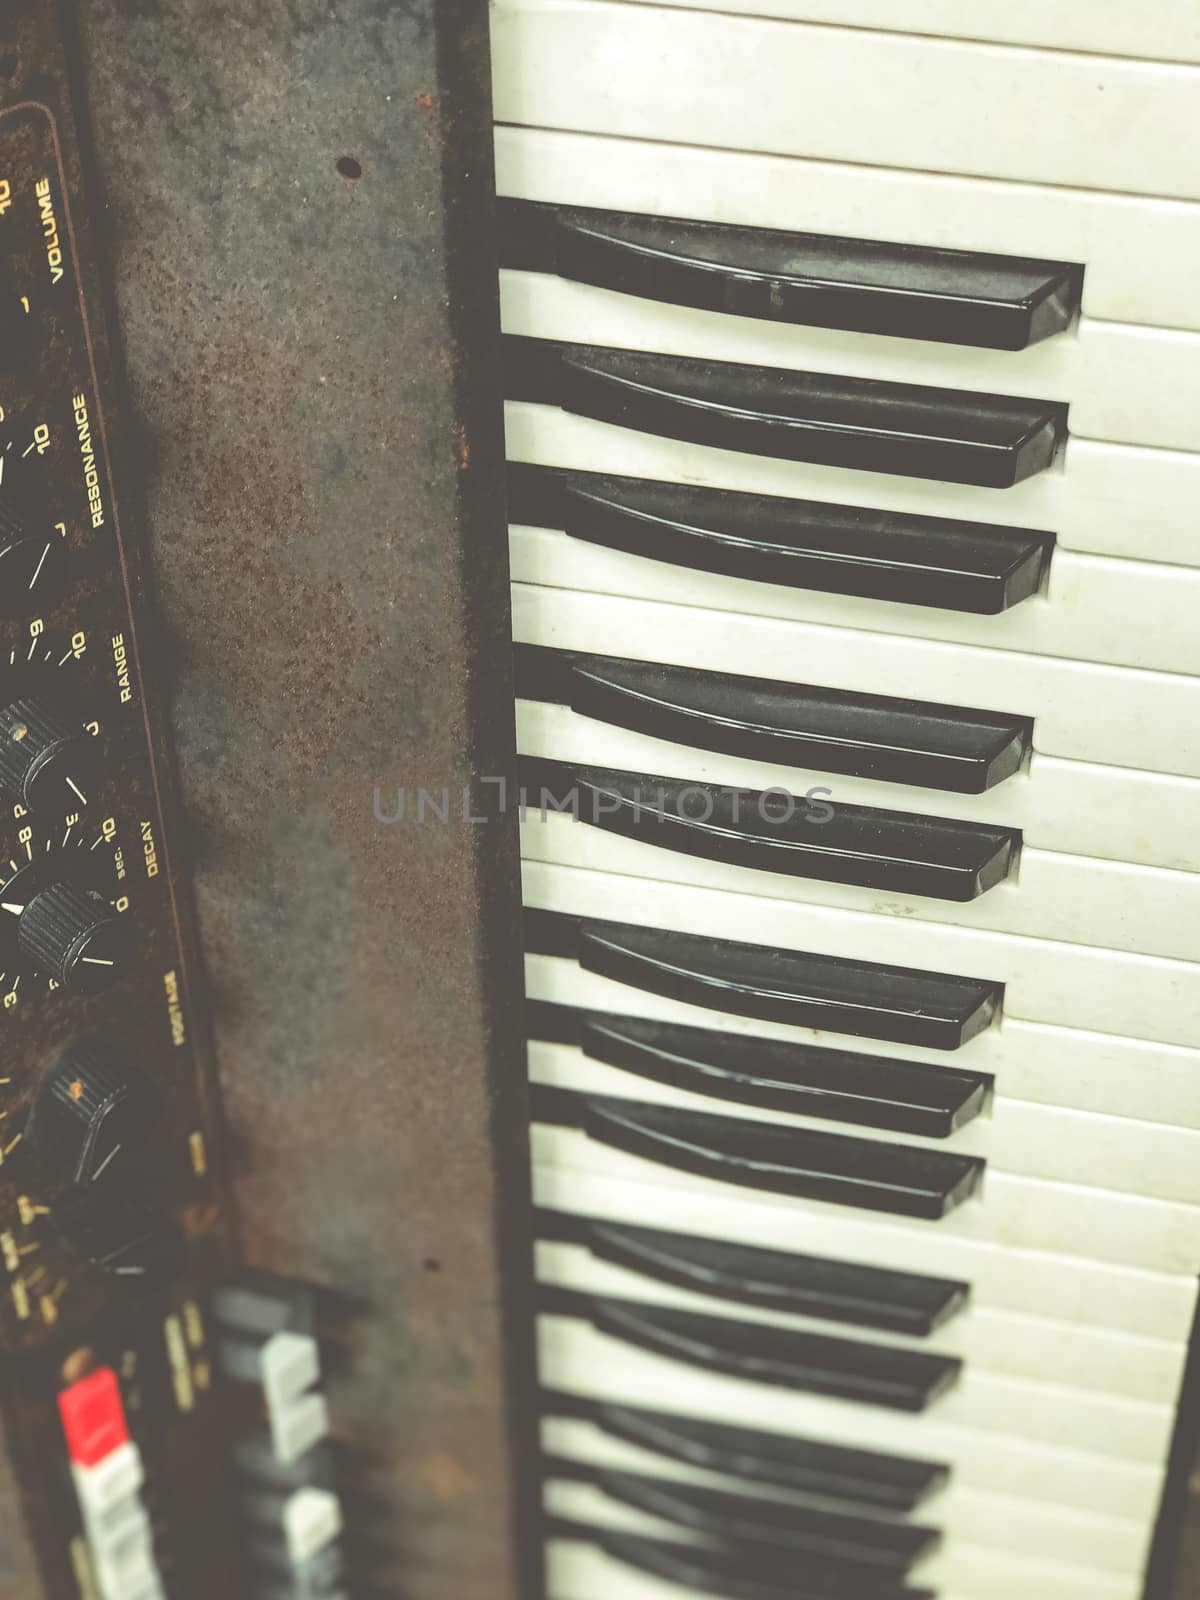 Old retro unnecessary faulty musical synthesizer by Softulka